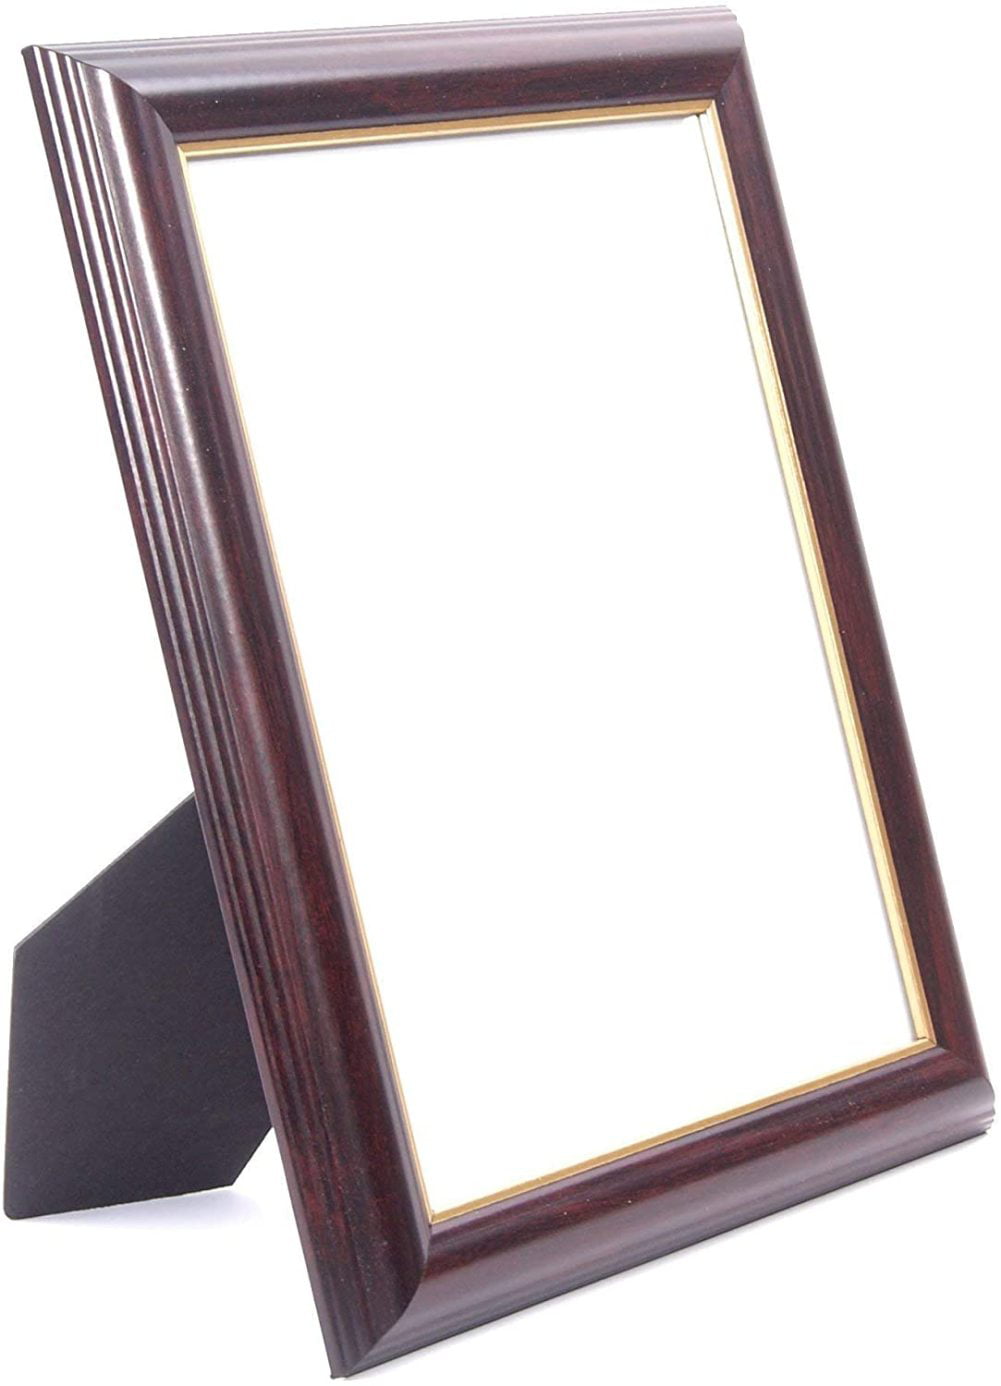 Mahogany W/ Gold Inlay 8.5x11 Certificate Frame W/ Stand and Wall Hanger 